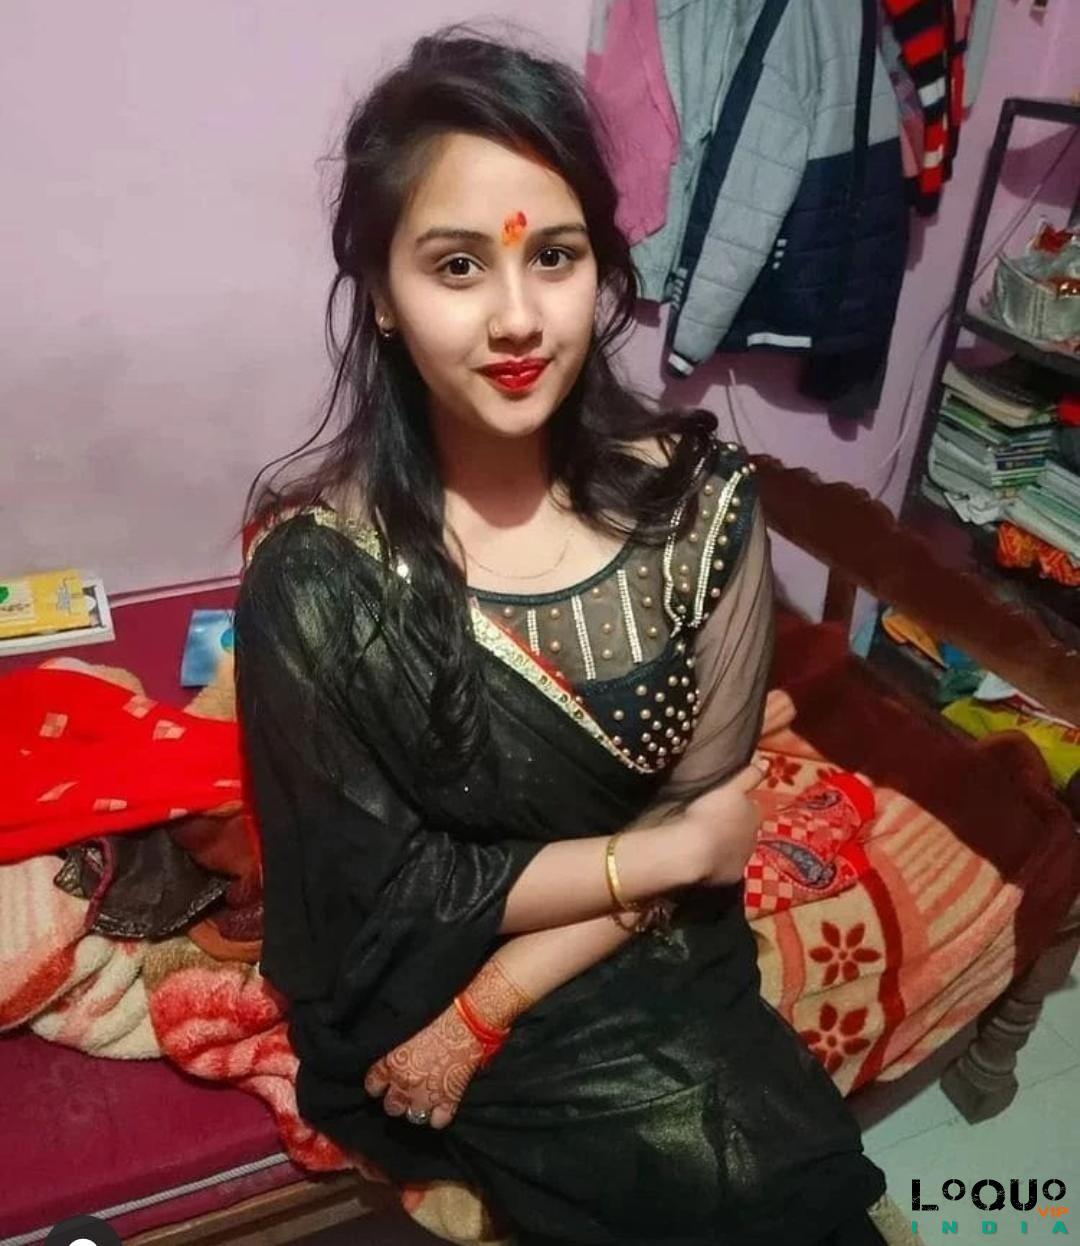 Call Girls West Bengal: Kochbihar Real meat service available low price and genuine girl available